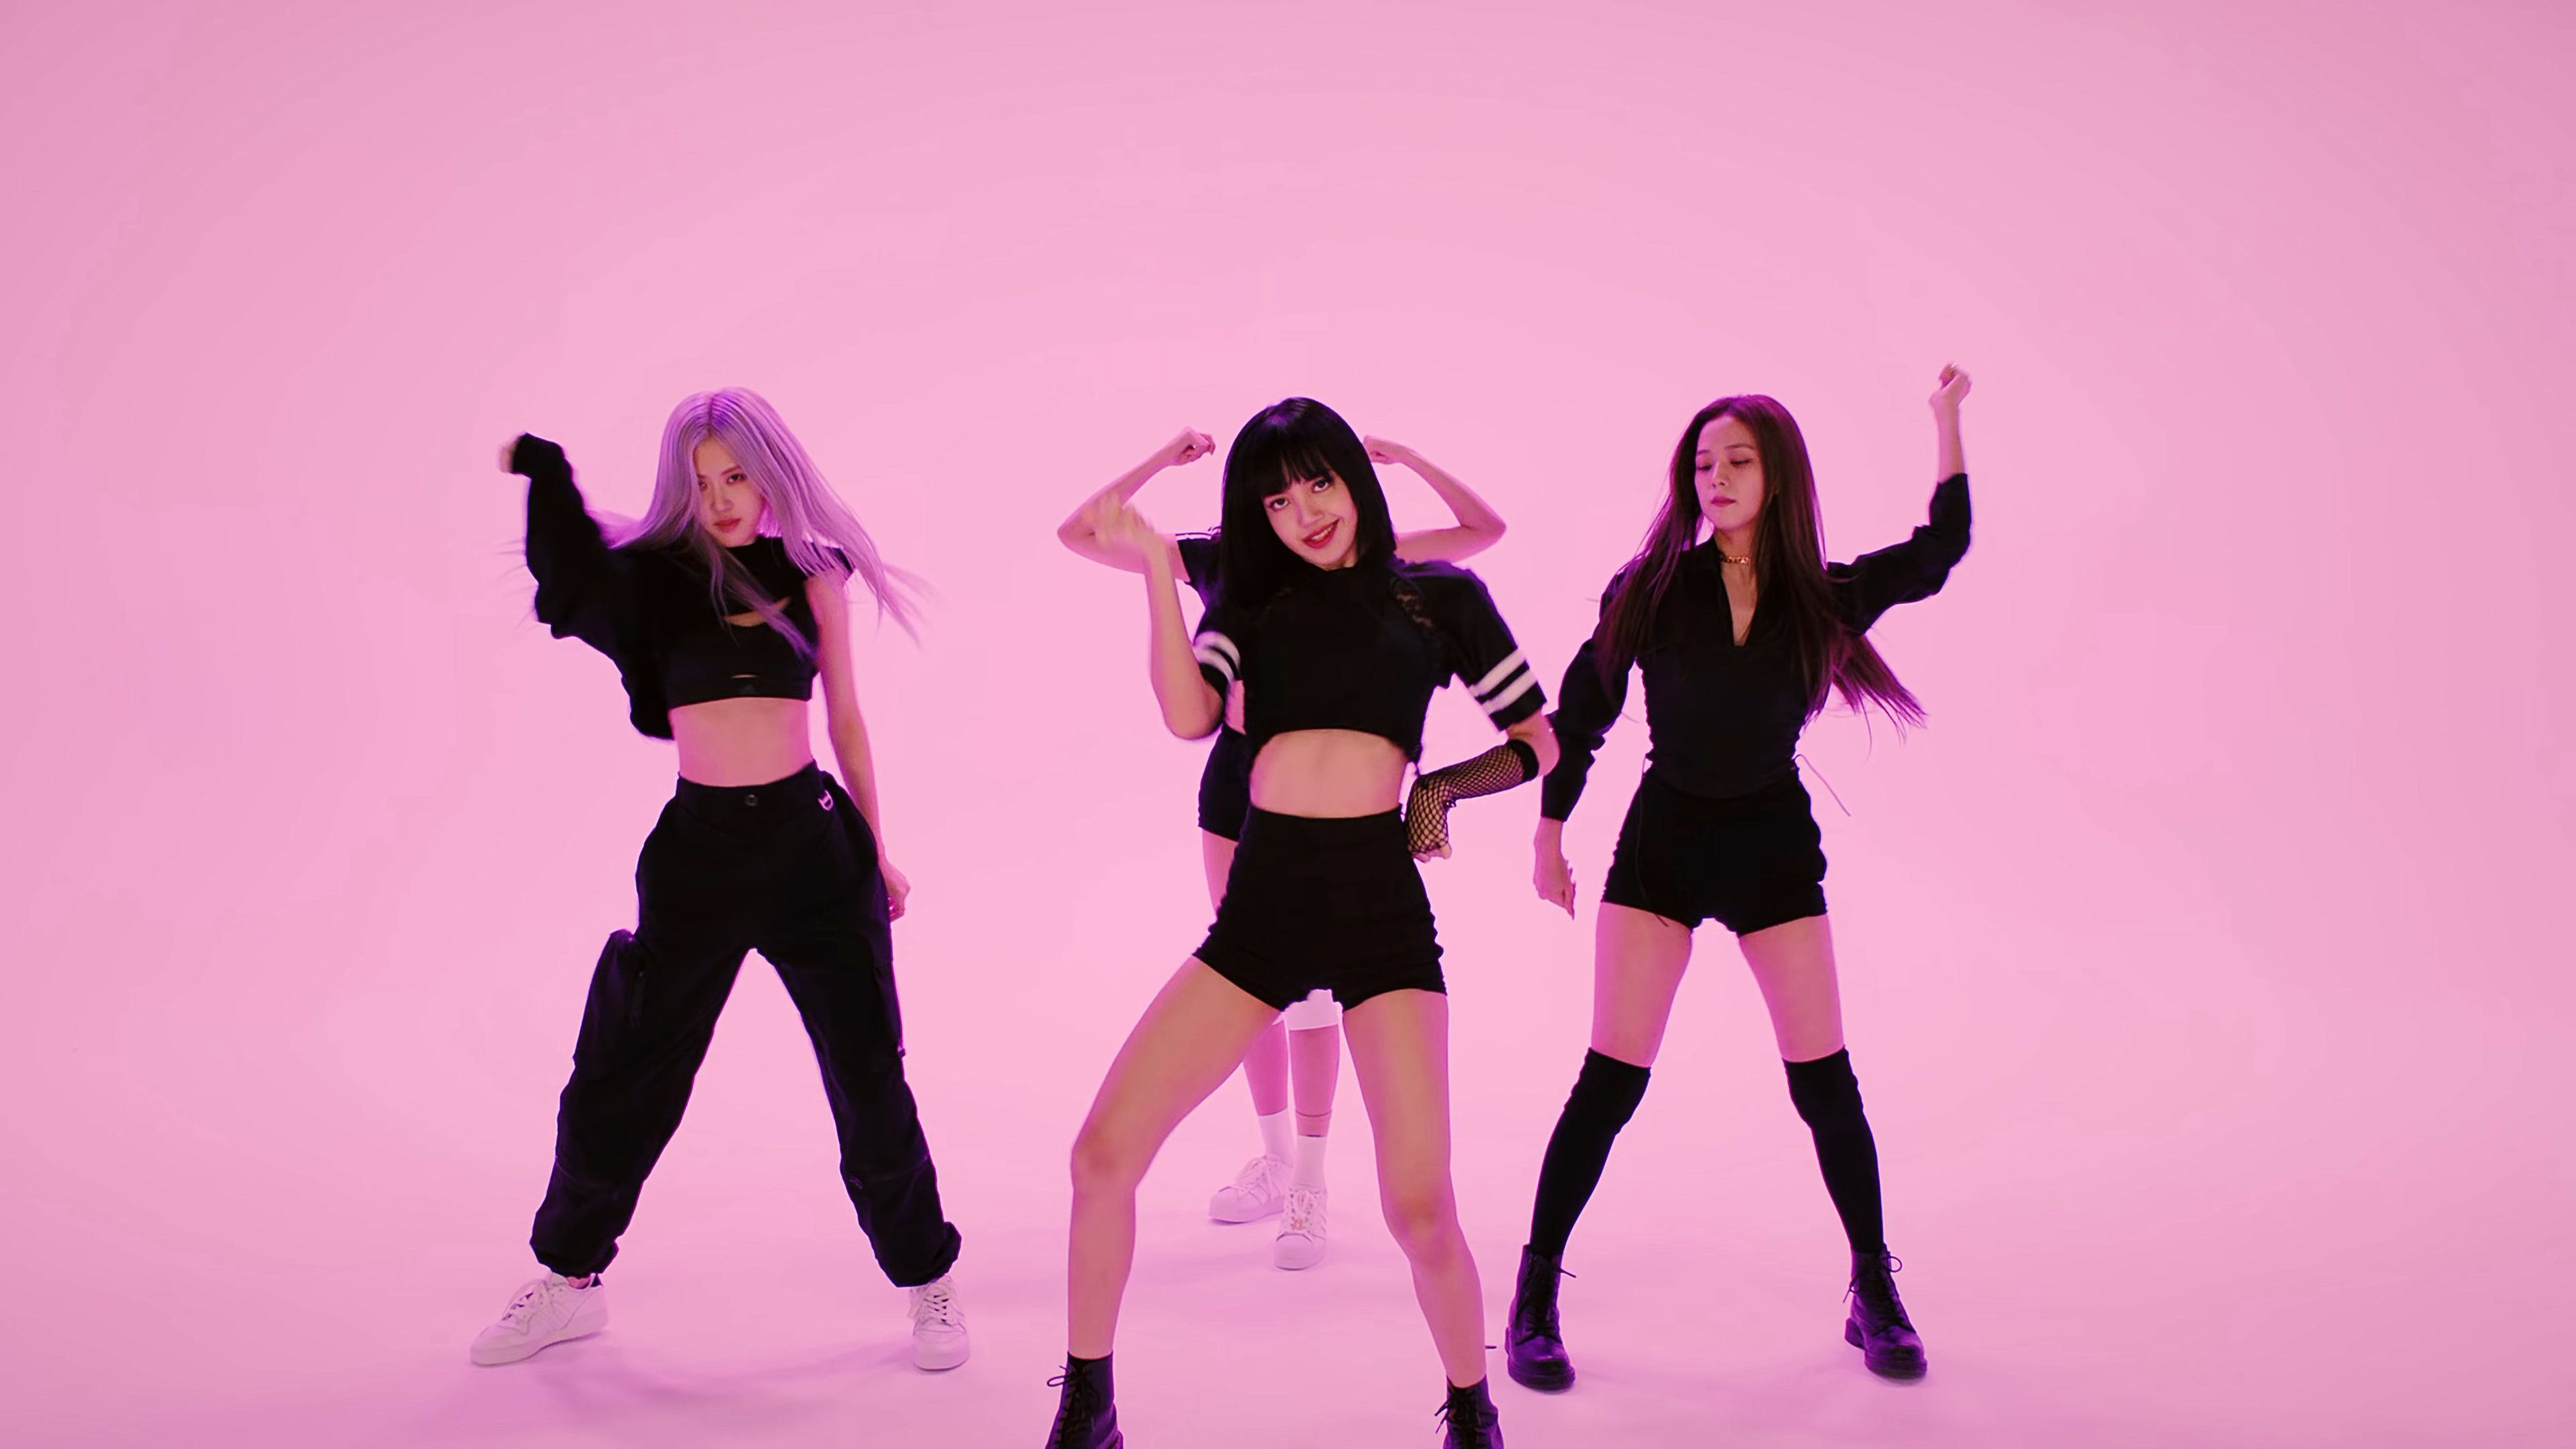 Popping Dance: Blackpink, How you like that, Dance performance, A style of dance that started in the late 1960s. 3840x2160 4K Wallpaper.